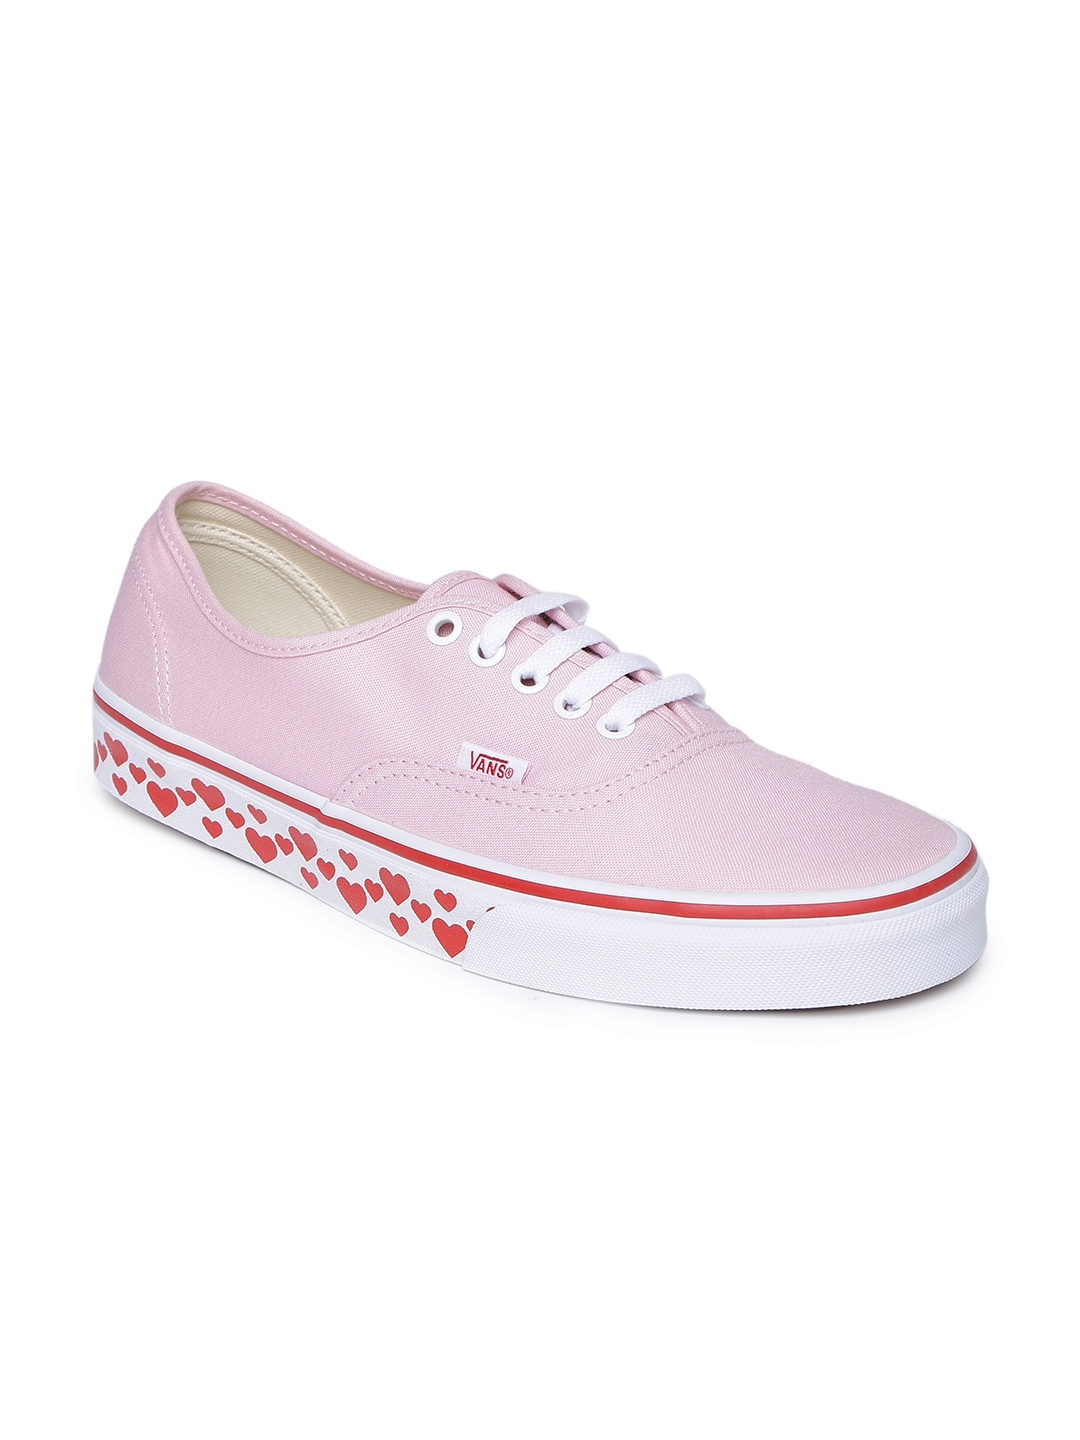 Buy Vans Unisex Pink Authentic Sneakers - Casual Shoes for Unisex ...